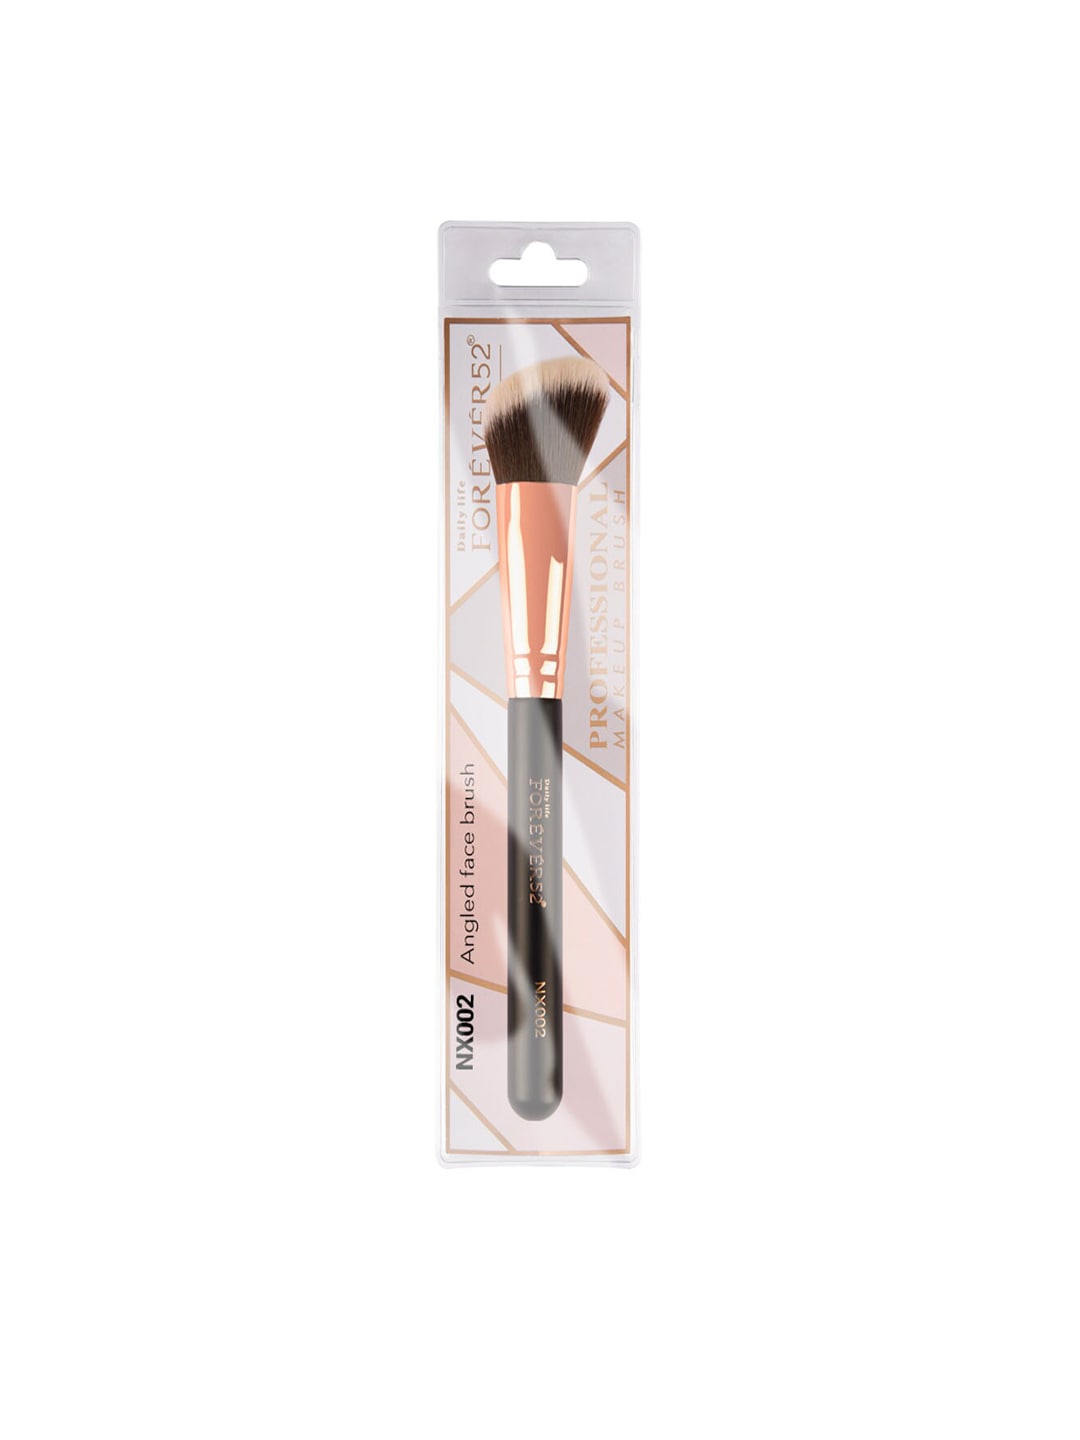 Daily Life Forever52 Angled face brush NX002 Price in India